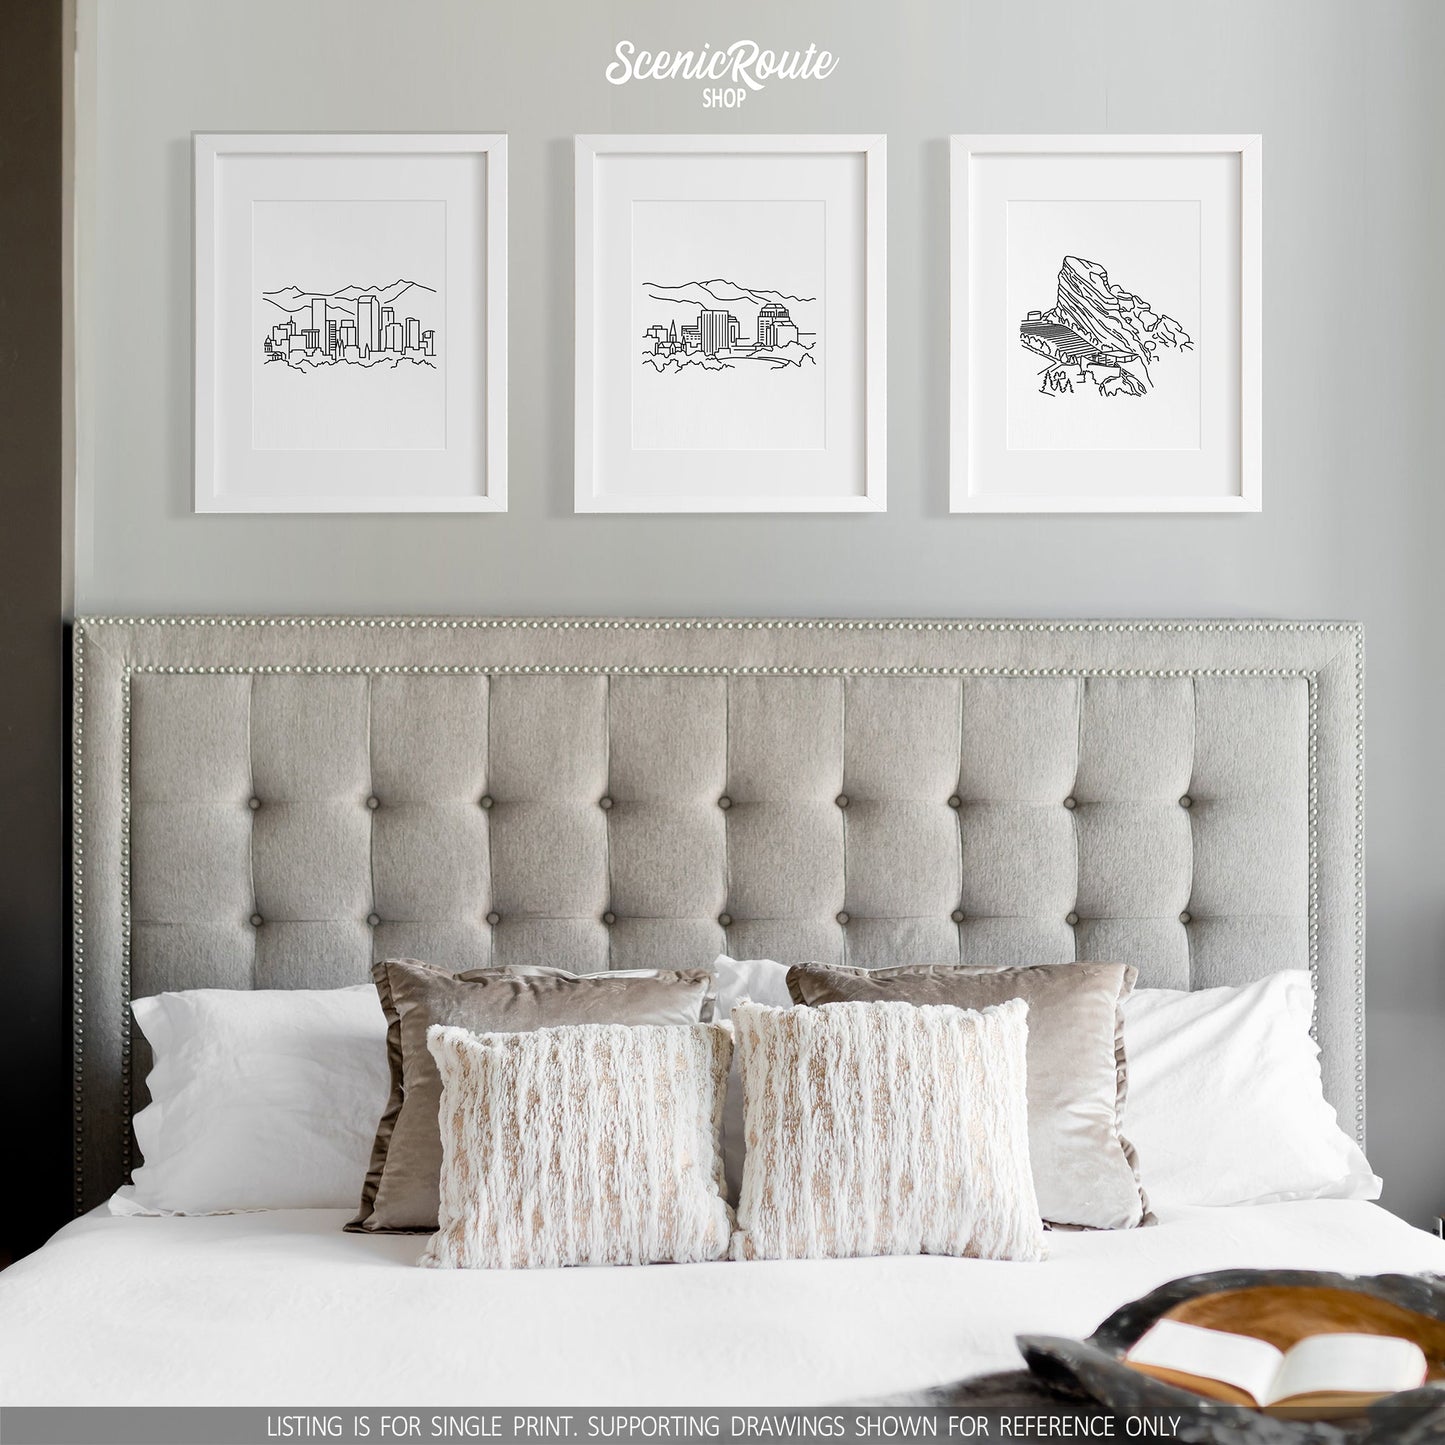 A group of three framed drawings on a white wall above a bed. The line art drawings include the Denver Skyline, Colorado Springs Skyline, and Red Rocks Amphitheatre